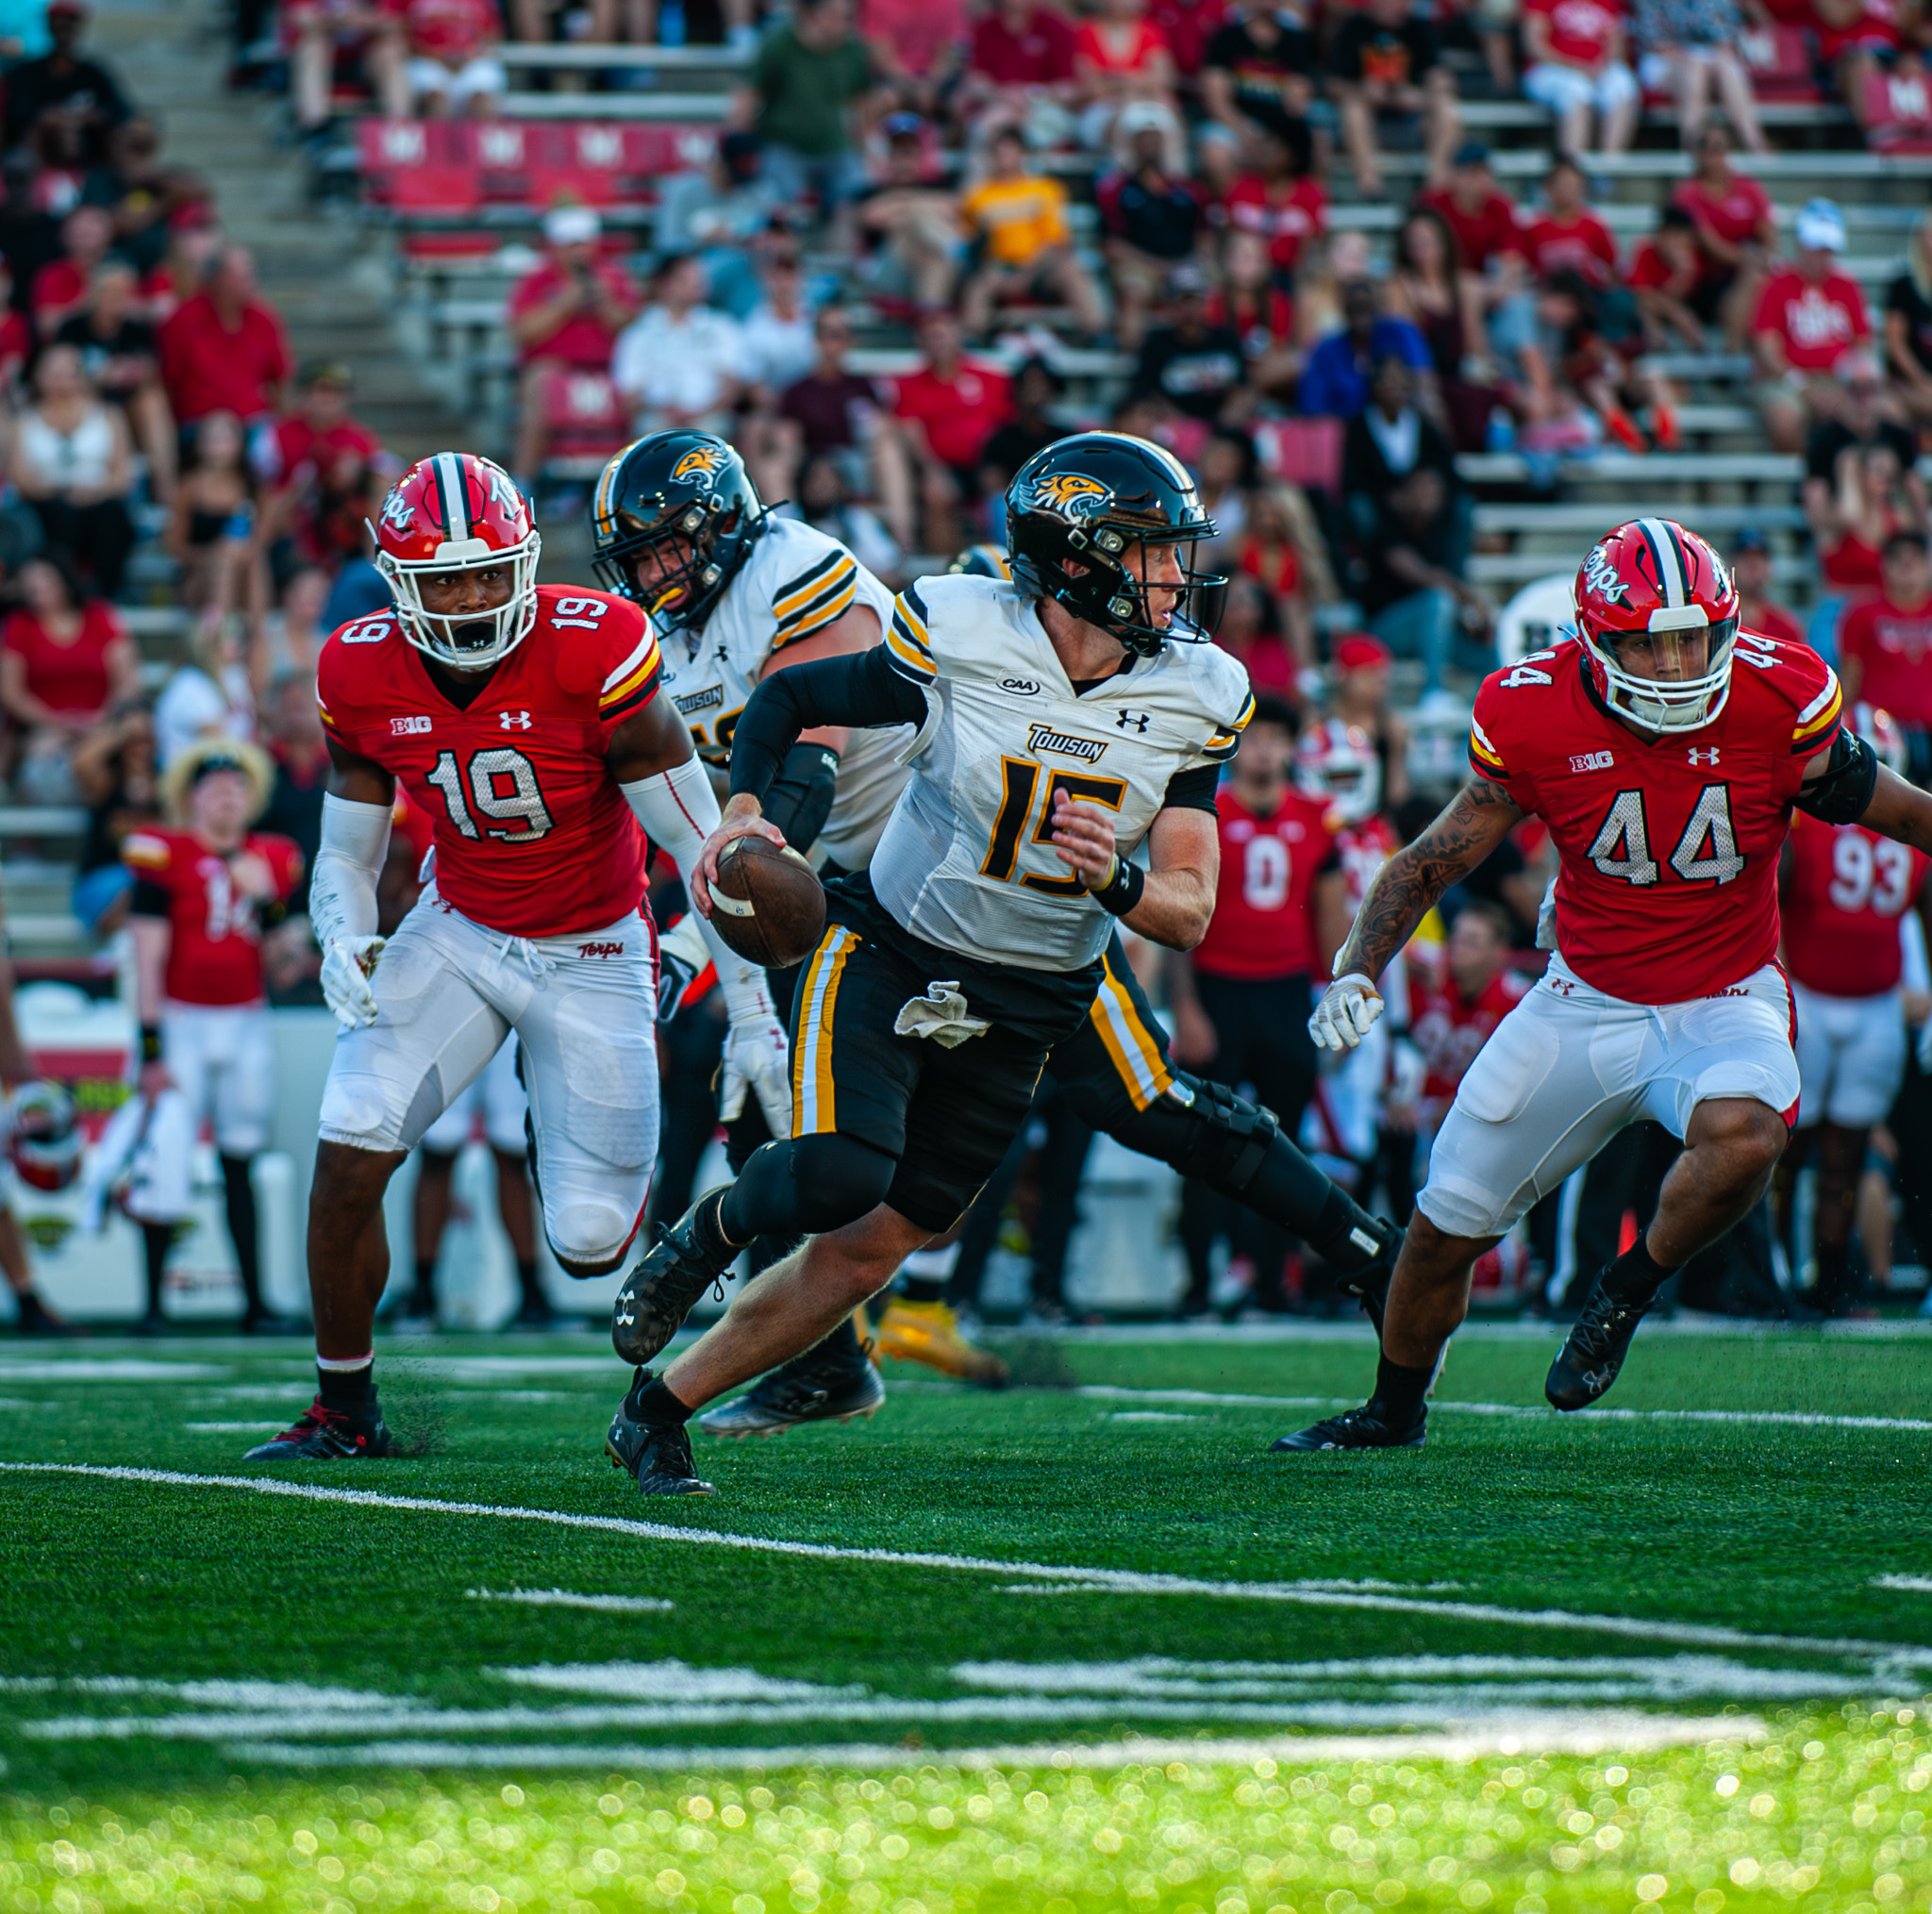 Towson football looks to bounce back with a win for its home opener